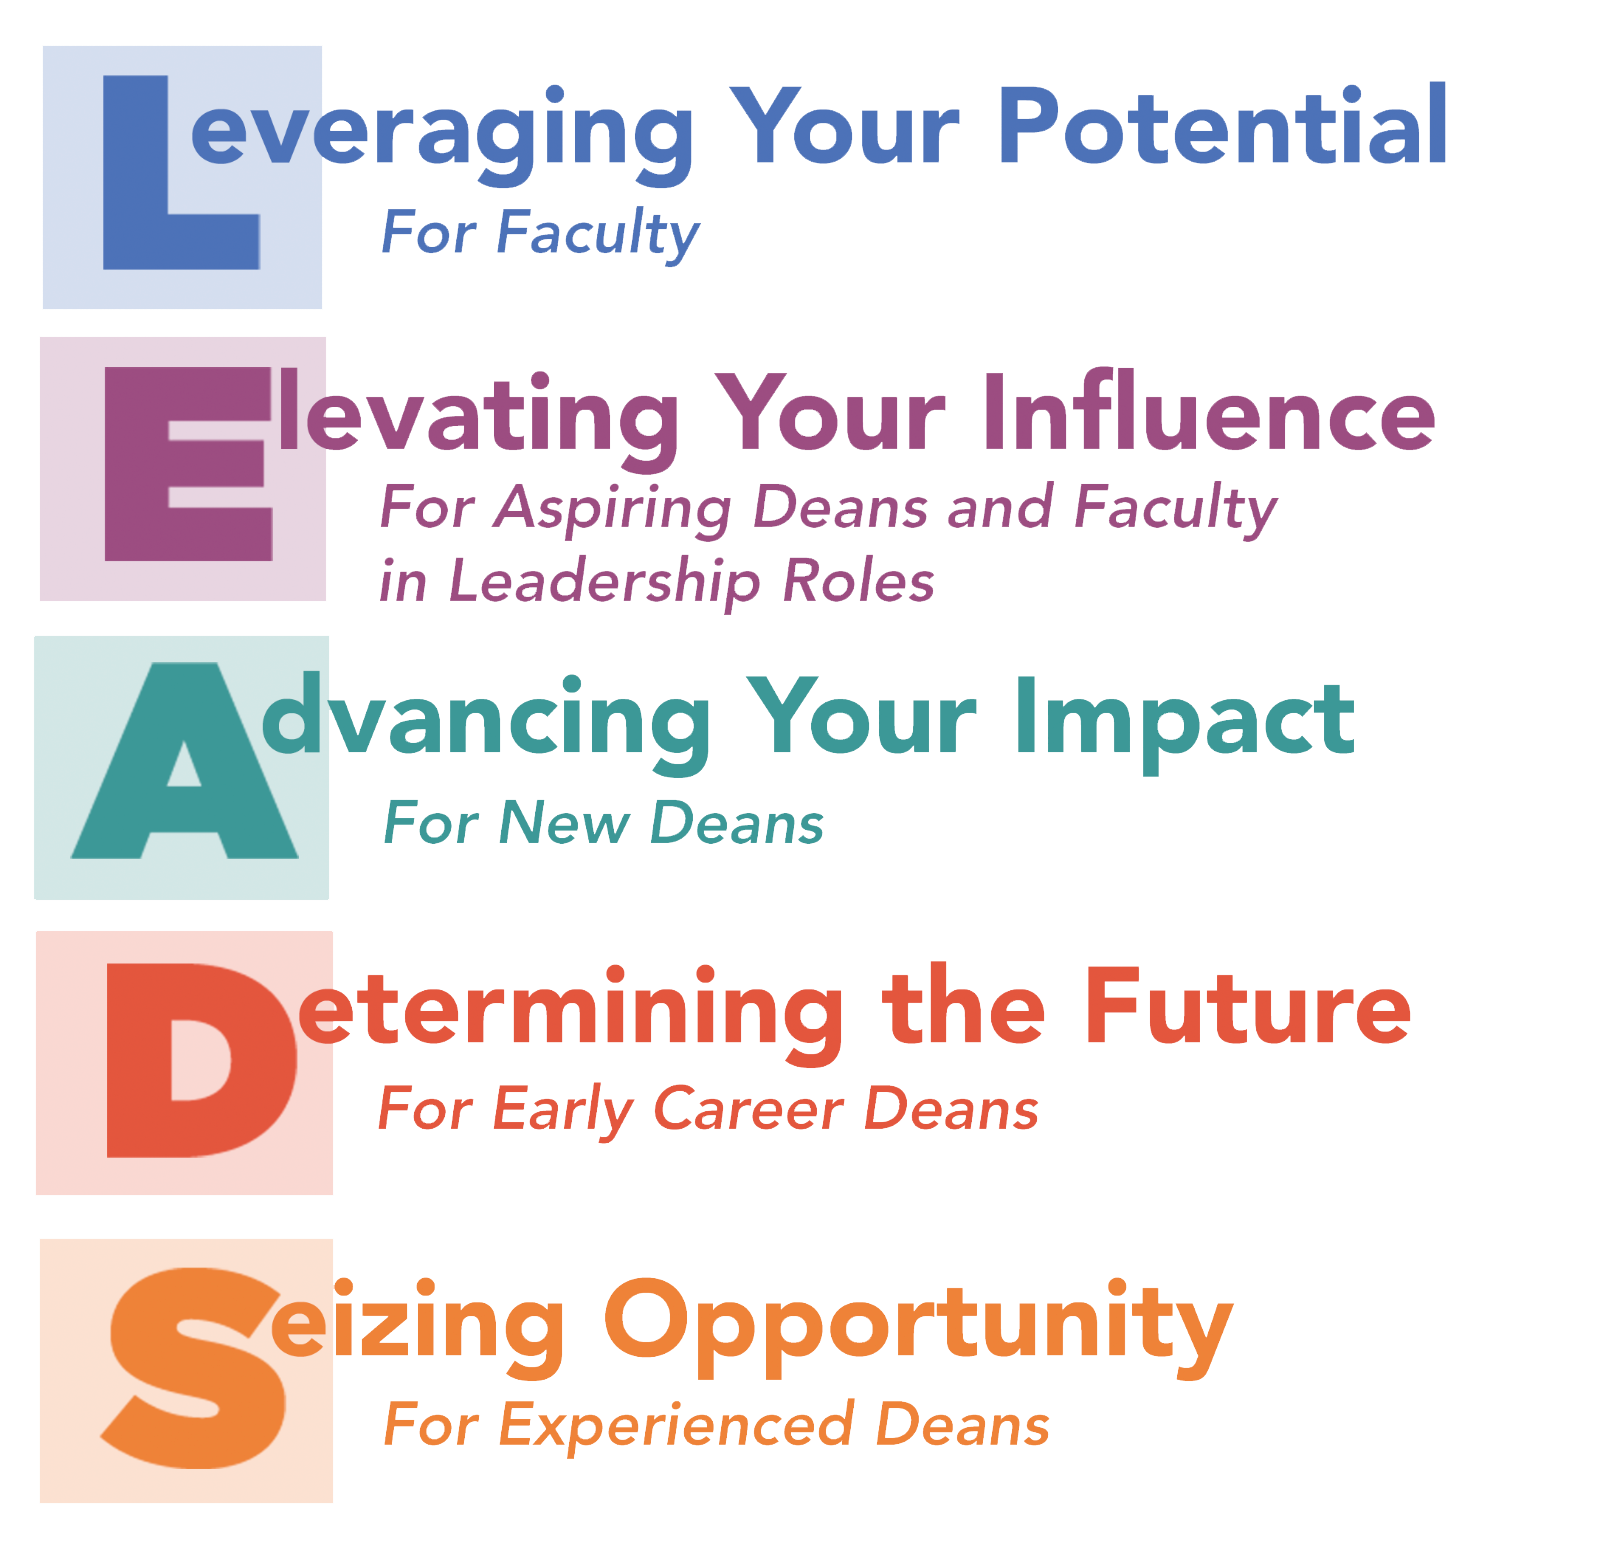 LEADS Acronym logo spelled out - L is Leveraging Your Potential: For Faculty, E is for Elevating Your Influence: For Aspiring Deans and Faculty in Leadership Roles, A is for Advancing Your Impact: For New Deans, D is for Determining the Future: For Early Career Deans, and S is for Seizing Opportunity: For Experienced Deans